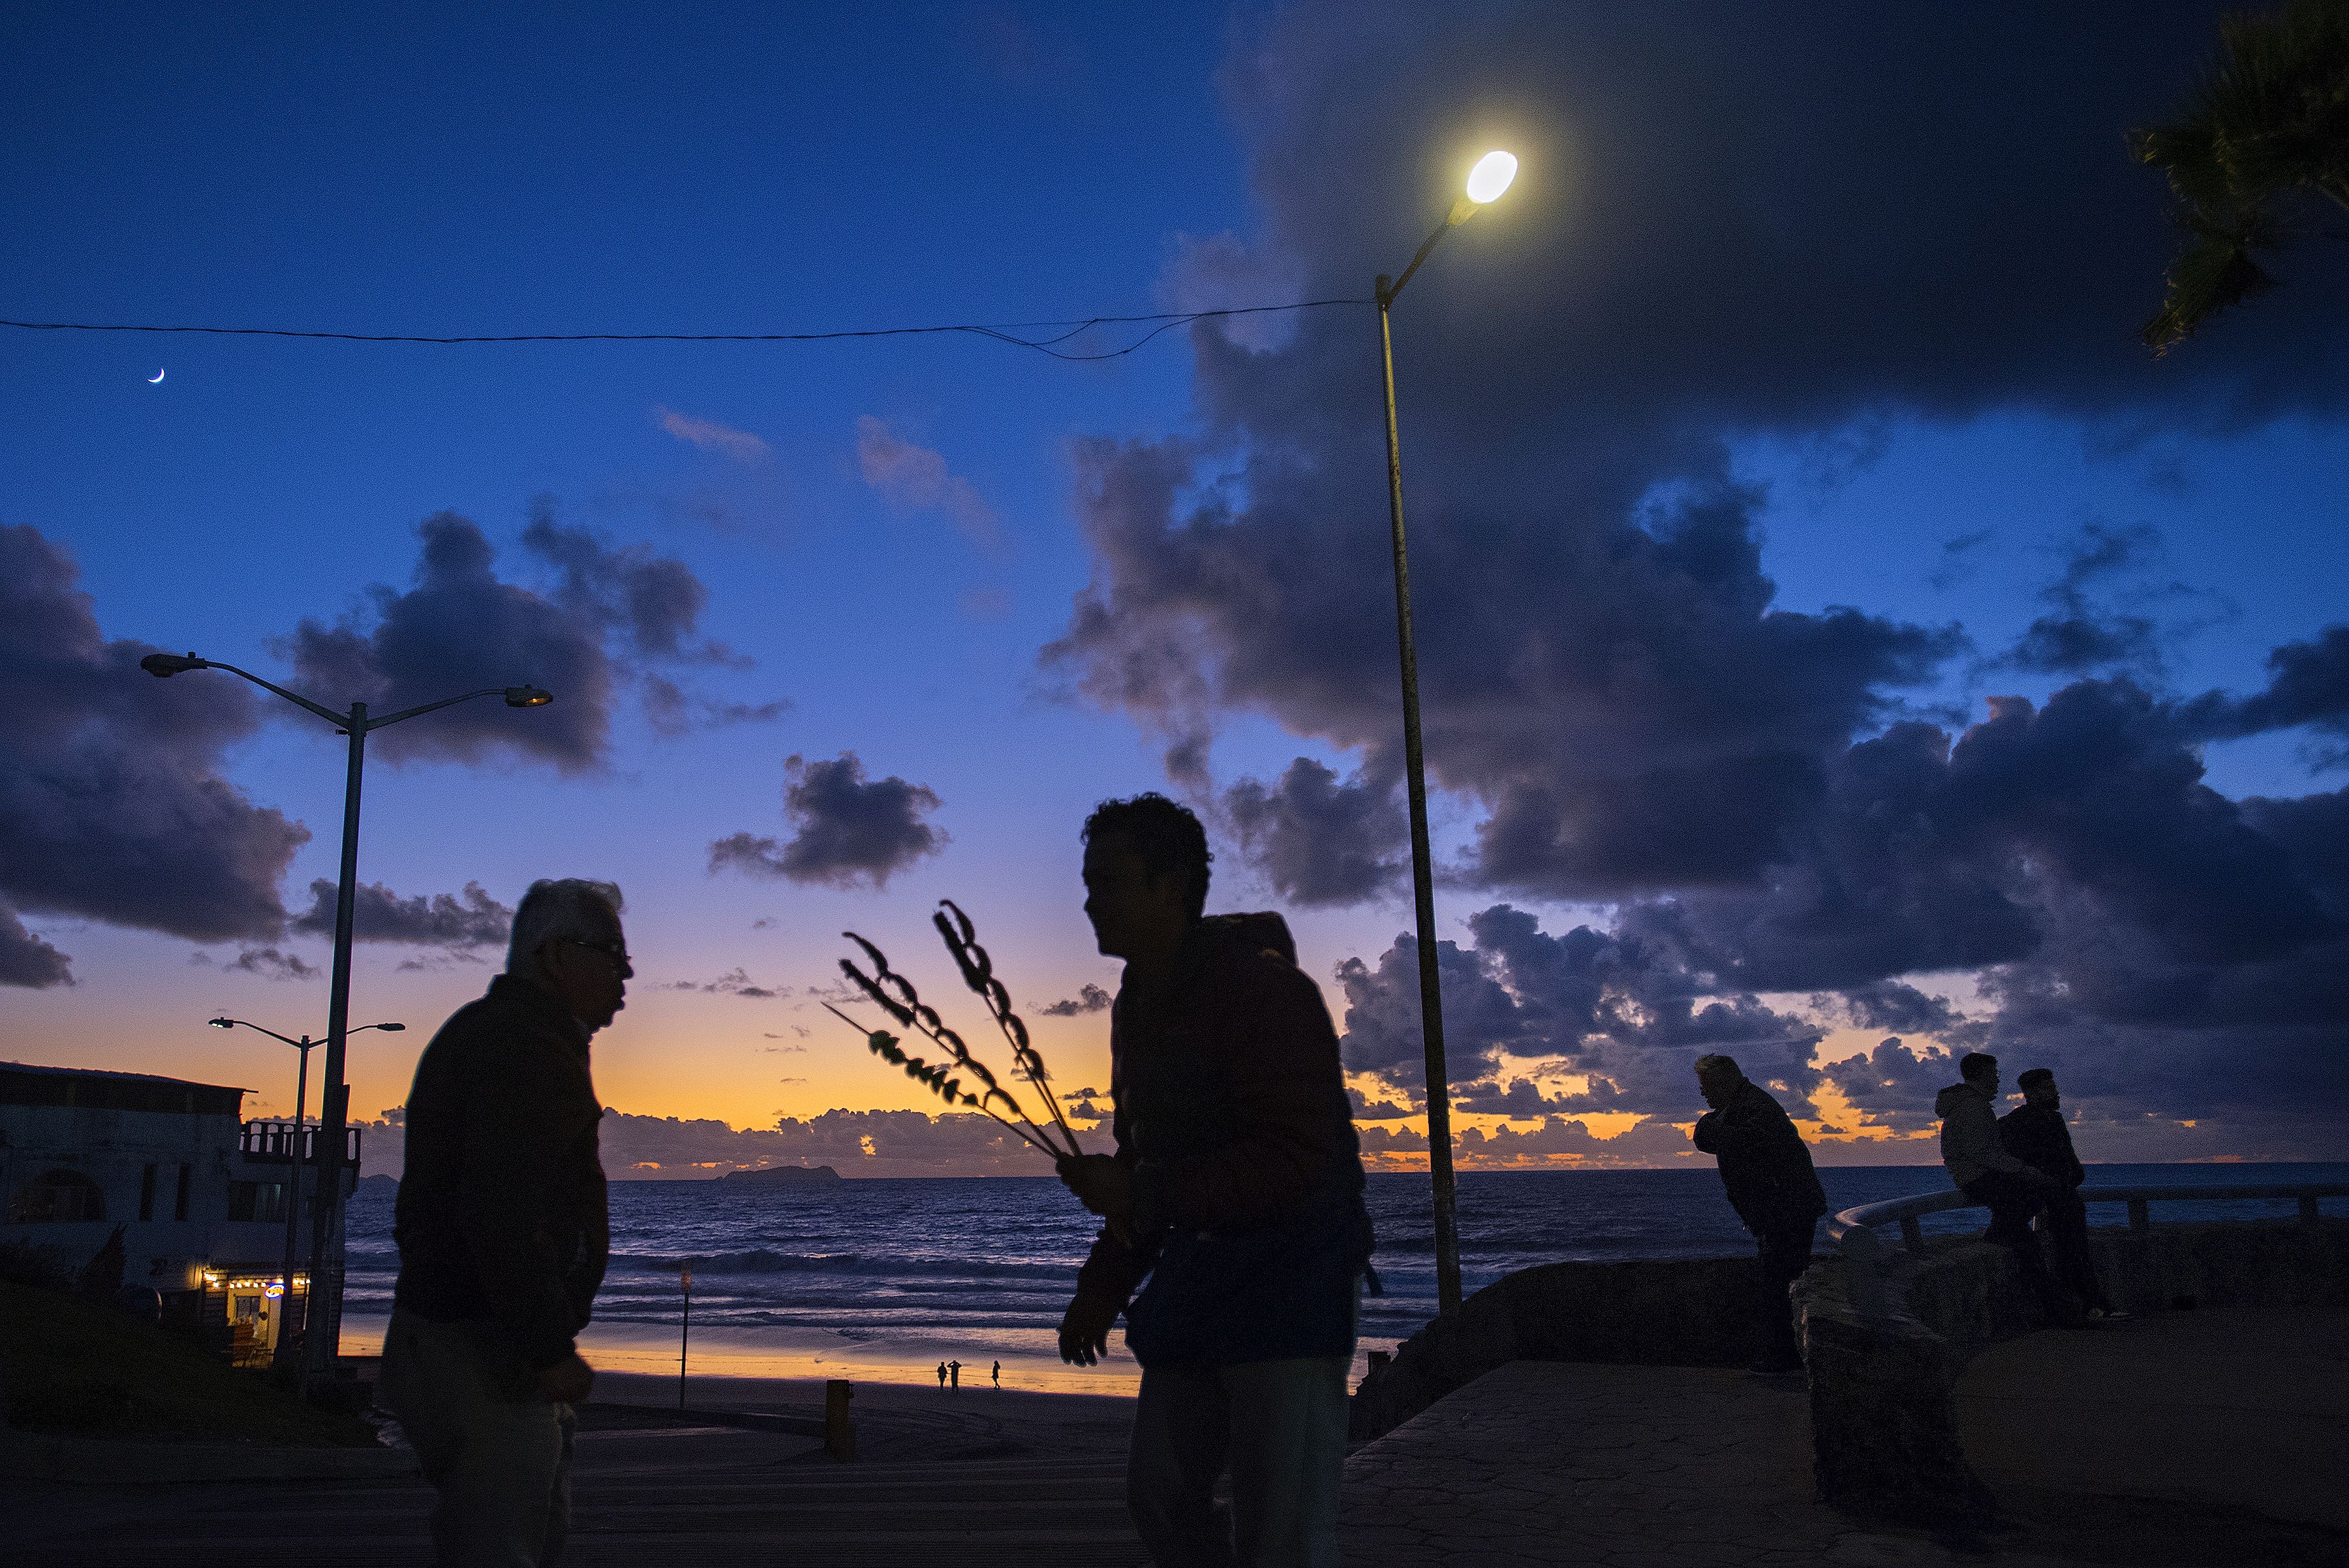 Vibrant color from the sunset provides a dramatic scene for locals and visitors at Playas de Tijuana on Nov. 29. Residents and tourists alike are drawn to the popular area for the beach, scenic views, seafood, restaurants and local bars. Image by Amanda Cowan. Mexico, 2019.